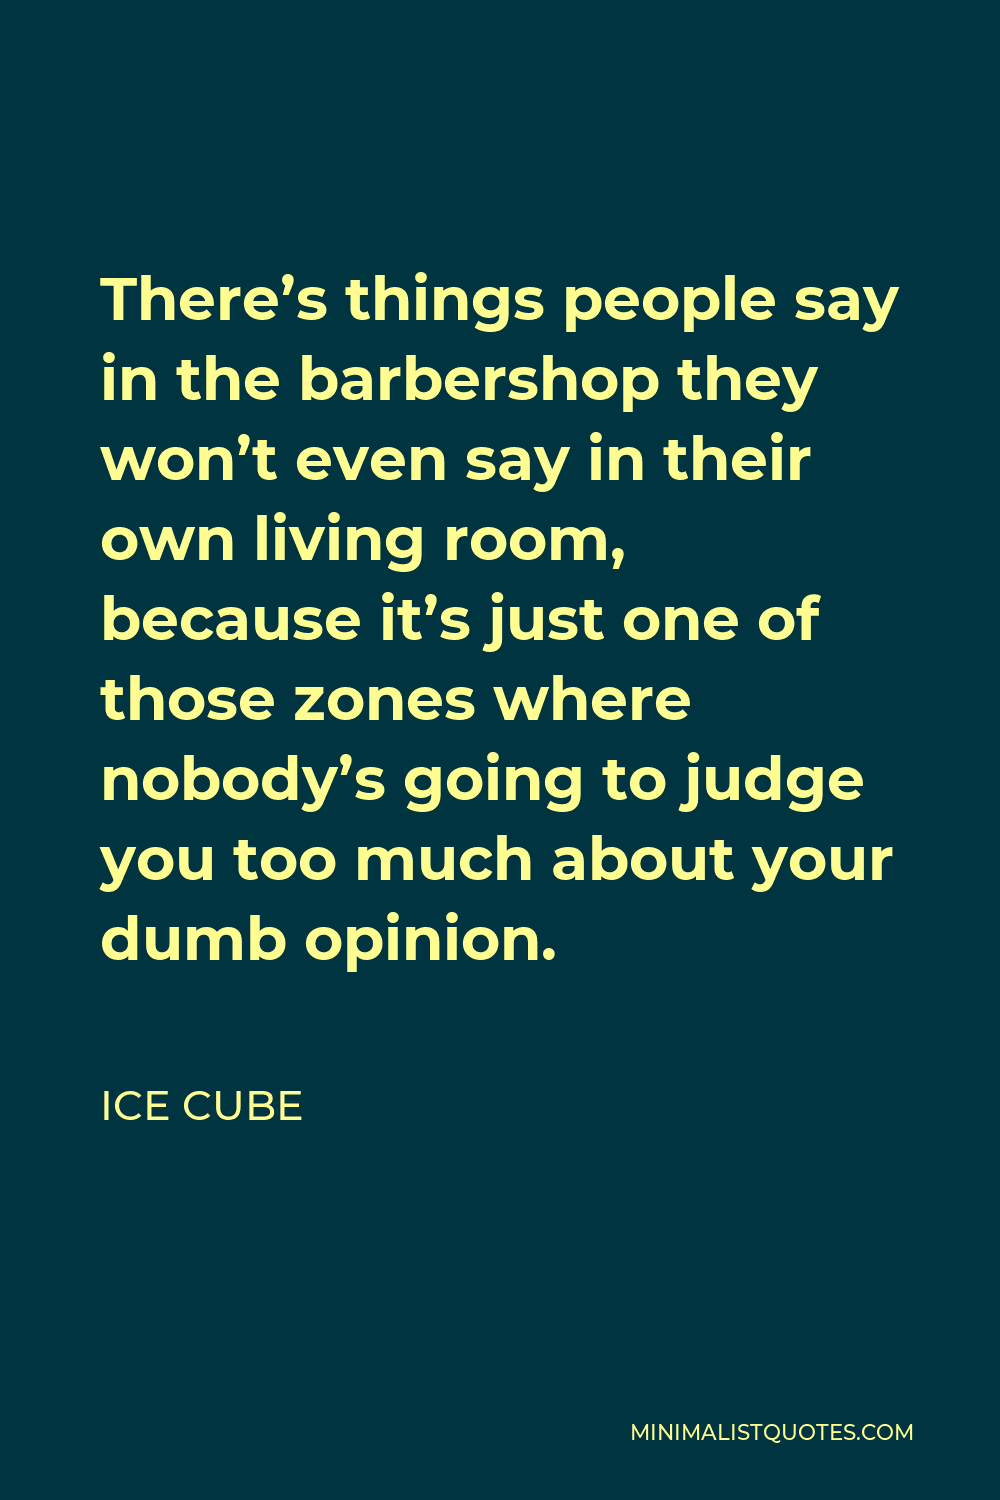 Ice Cube Quote - There’s things people say in the barbershop they won’t even say in their own living room, because it’s just one of those zones where nobody’s going to judge you too much about your dumb opinion.